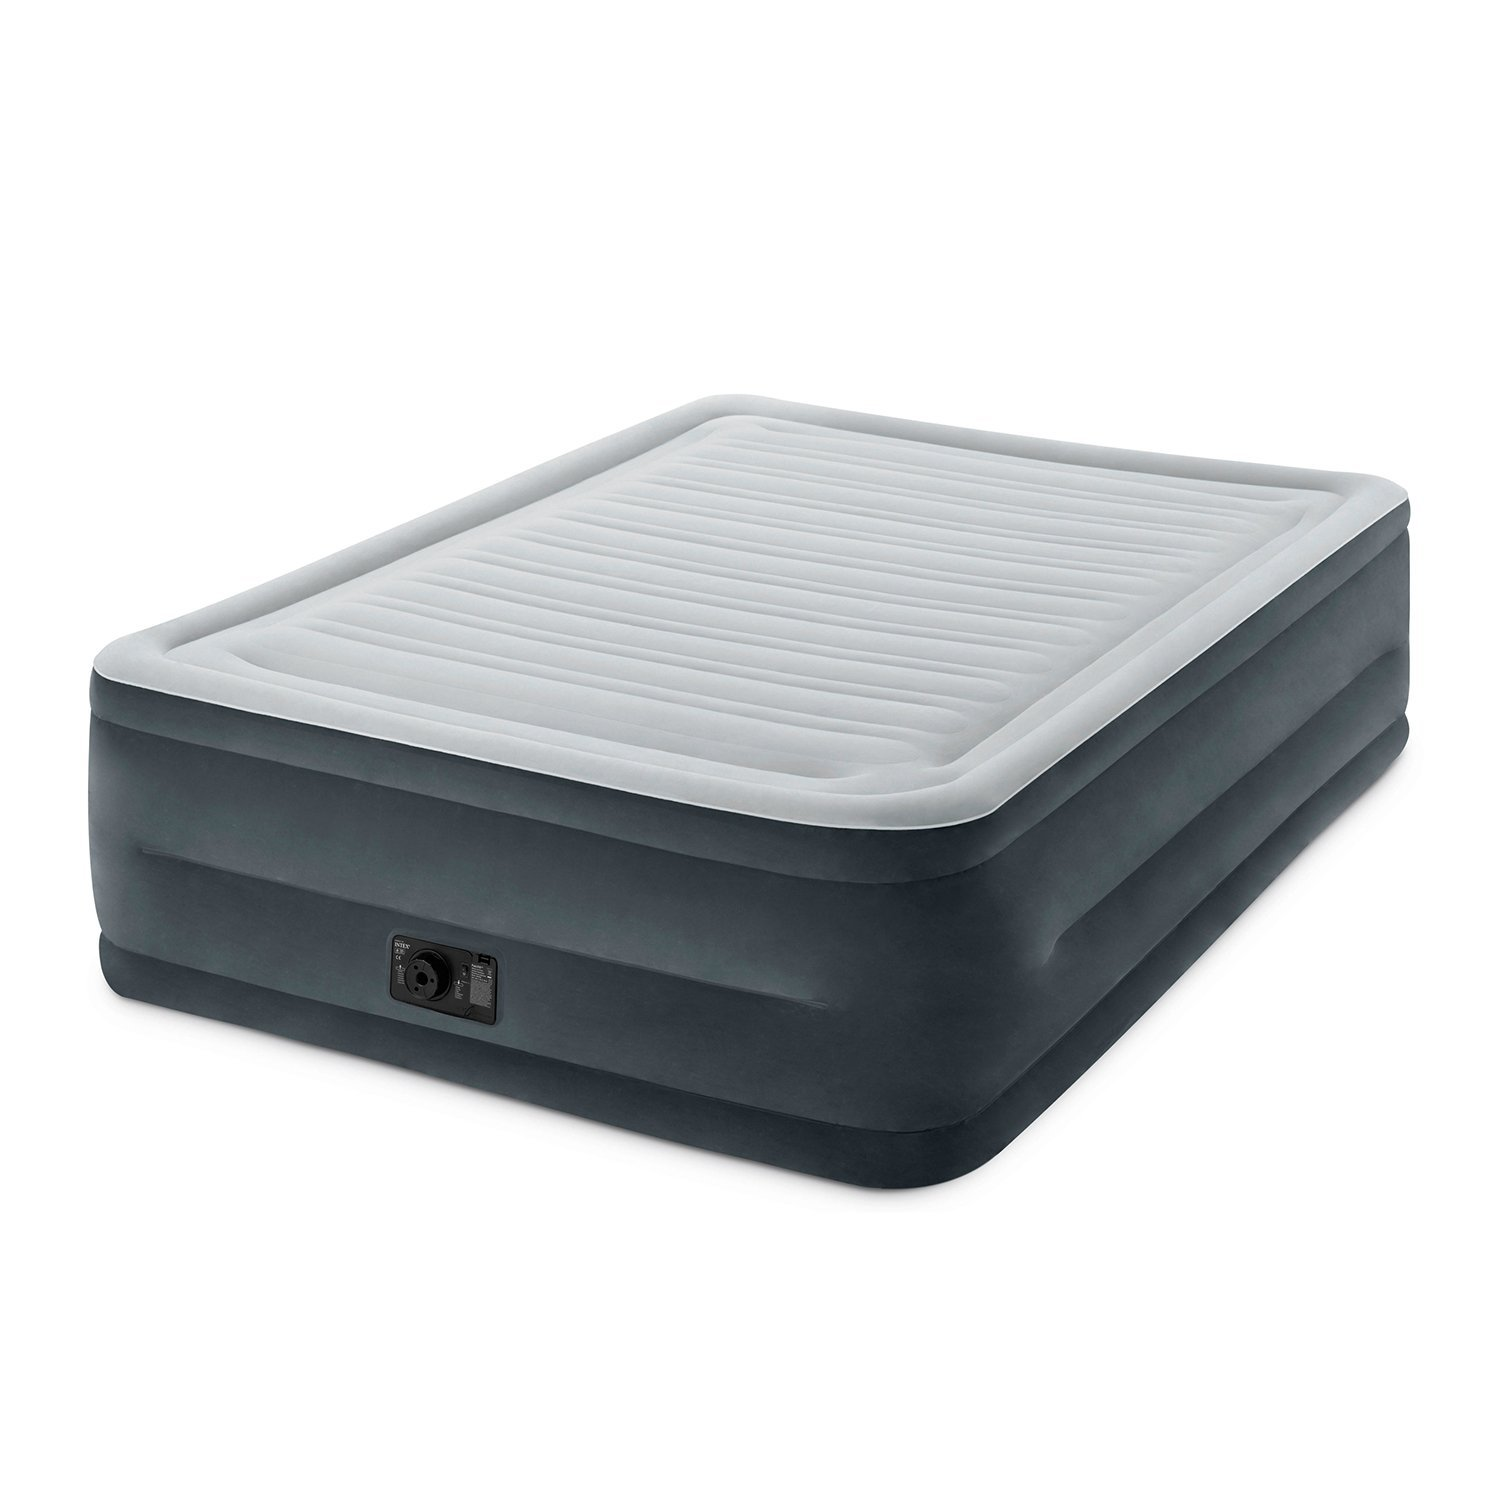 PRIME DAY DEALS ARE LIVE!! Intex Comfort Plus Elevated Airbed with Built in Electric Pump Only $32.90 Shipped!